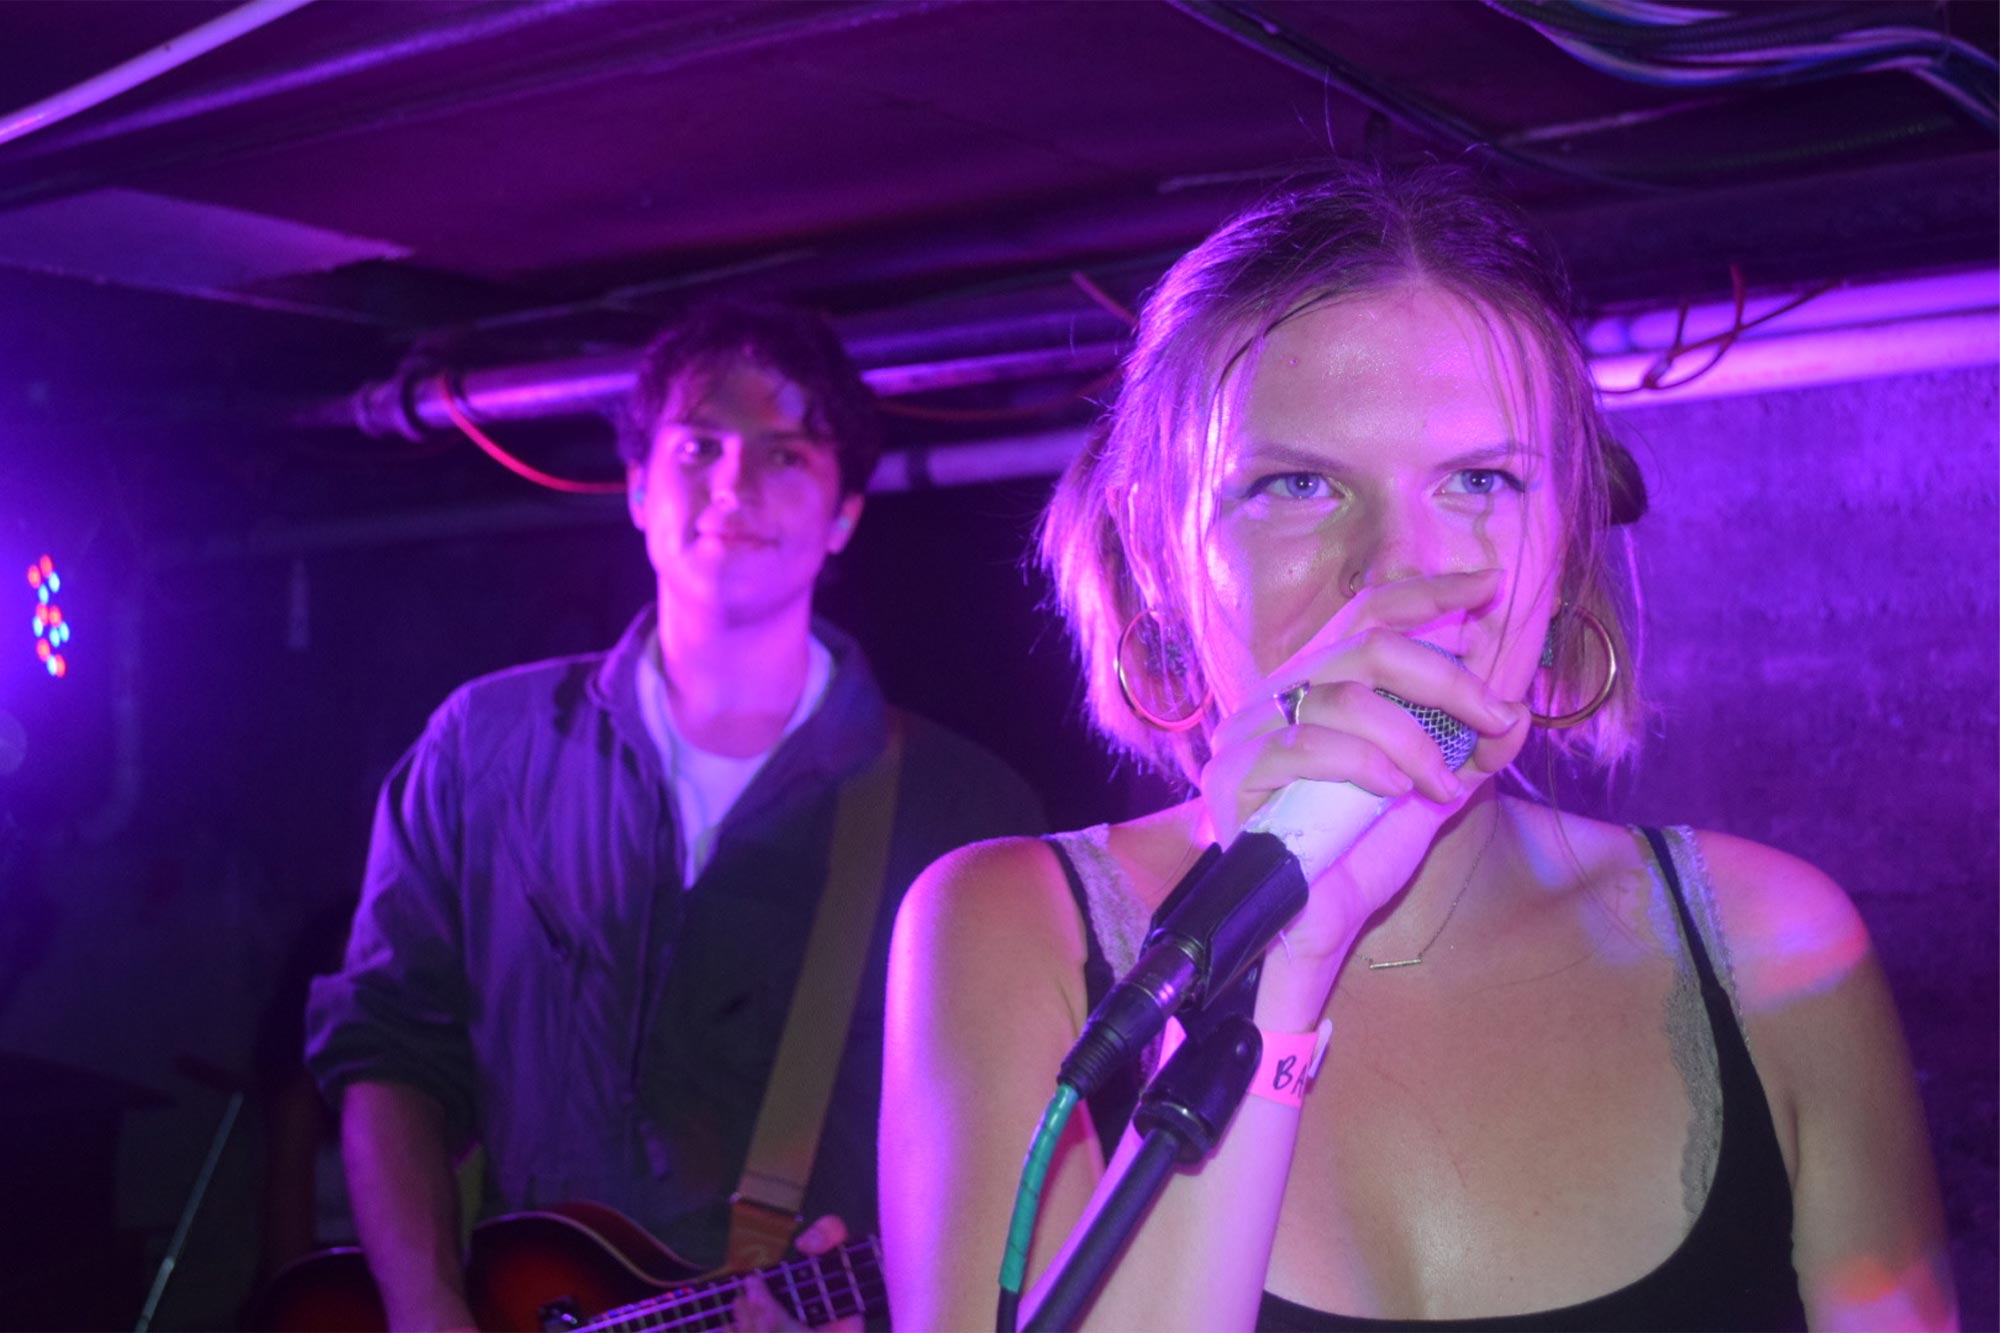 A photo of a person sining in the foreground while someone plays guitar in the back. 